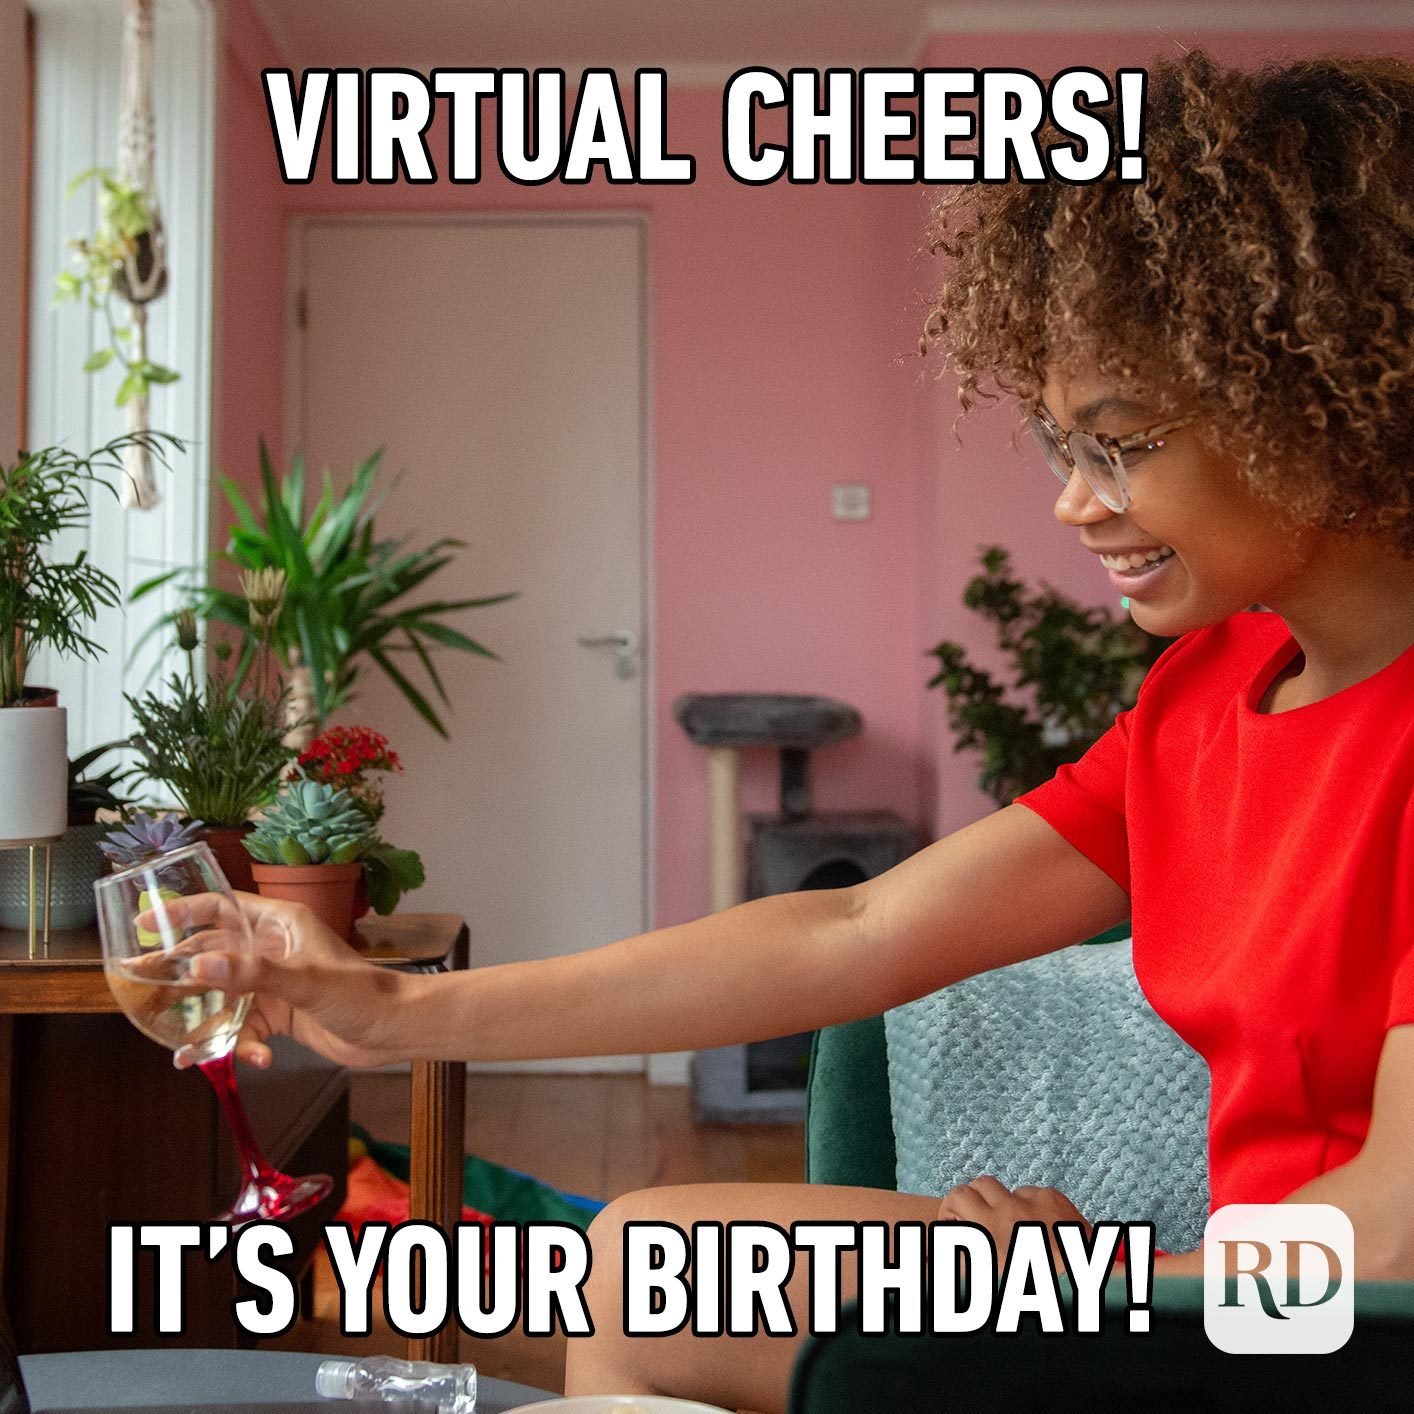 Virtual cheers! It's your birthday!